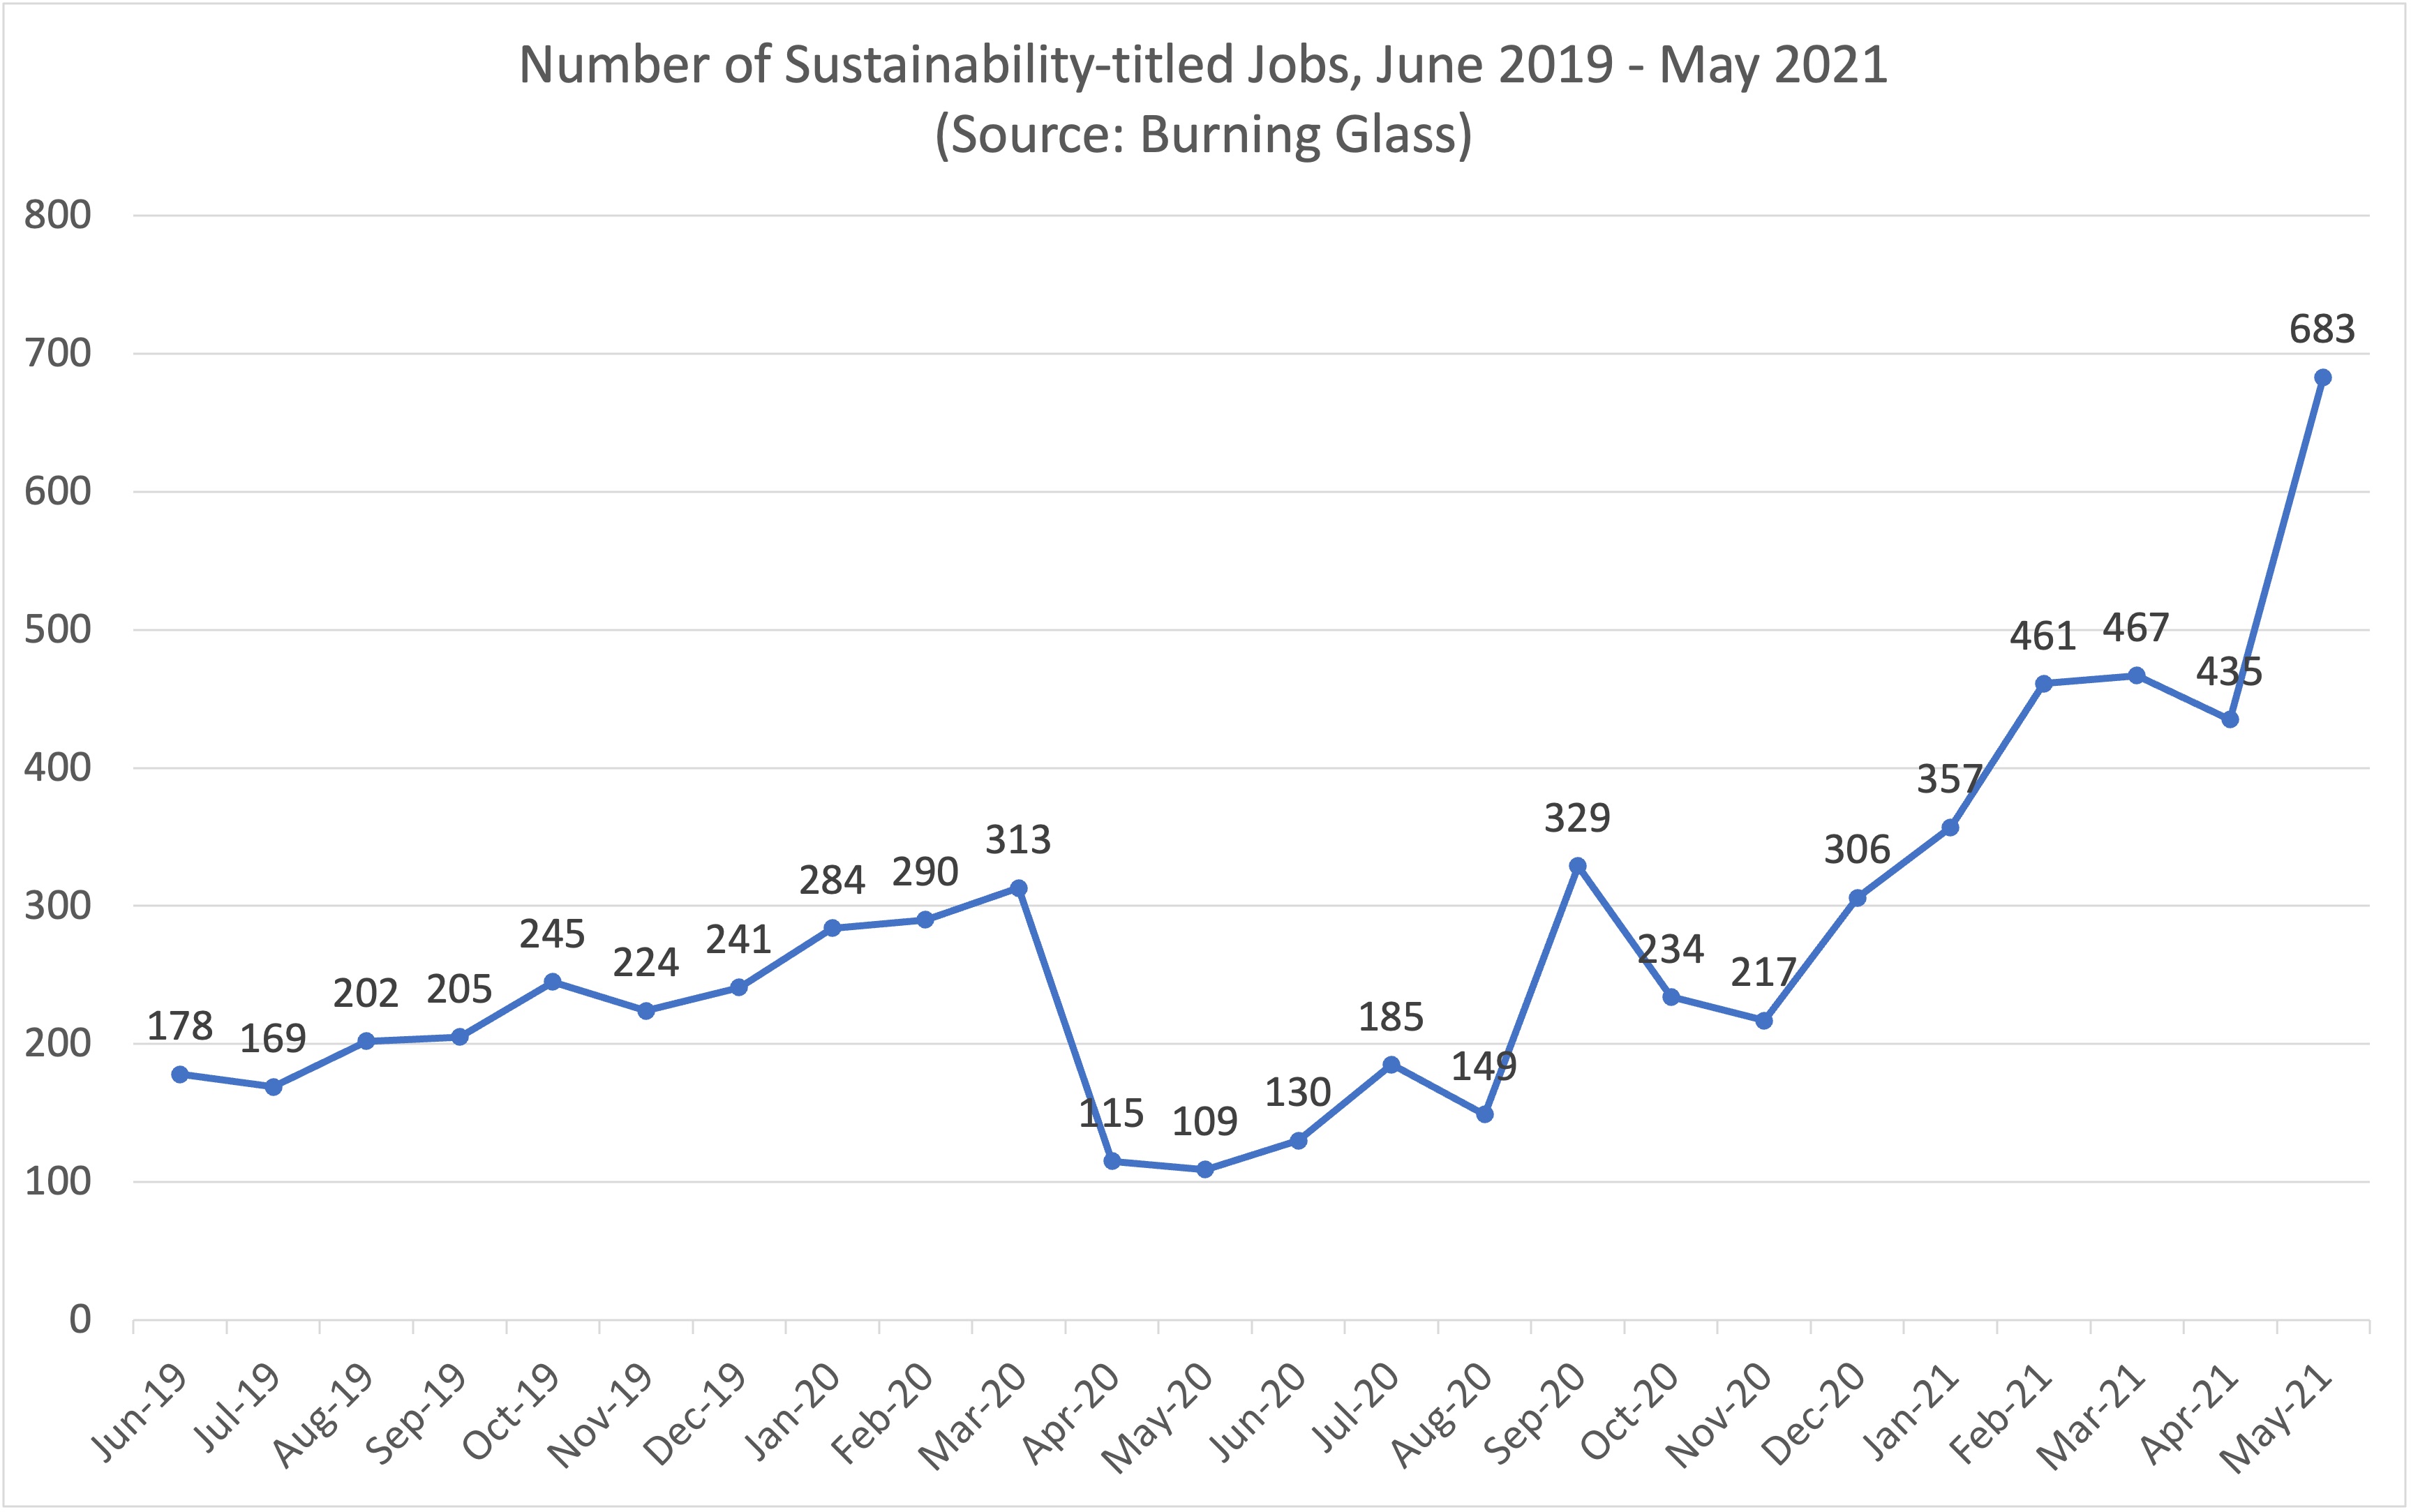 This is a chart depicting the rapid, month-over-month growth of sustainability-titled jobs over the past two years.